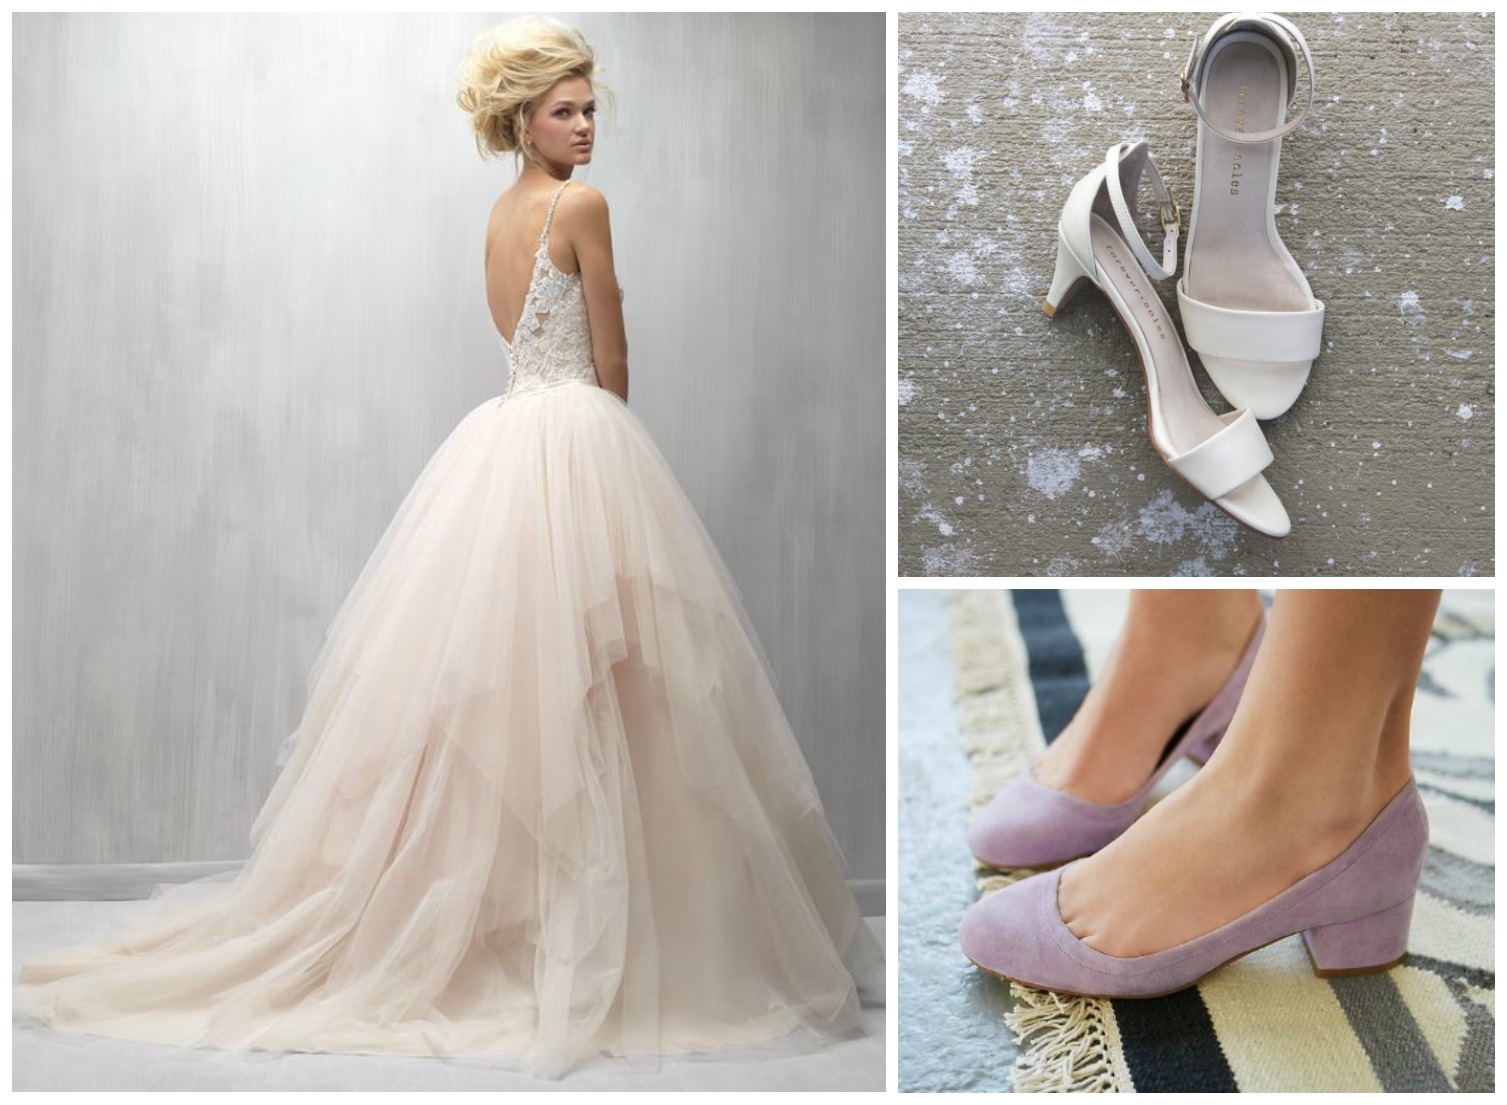 Bridal Shoe Choices Depending on the Style of the Dress